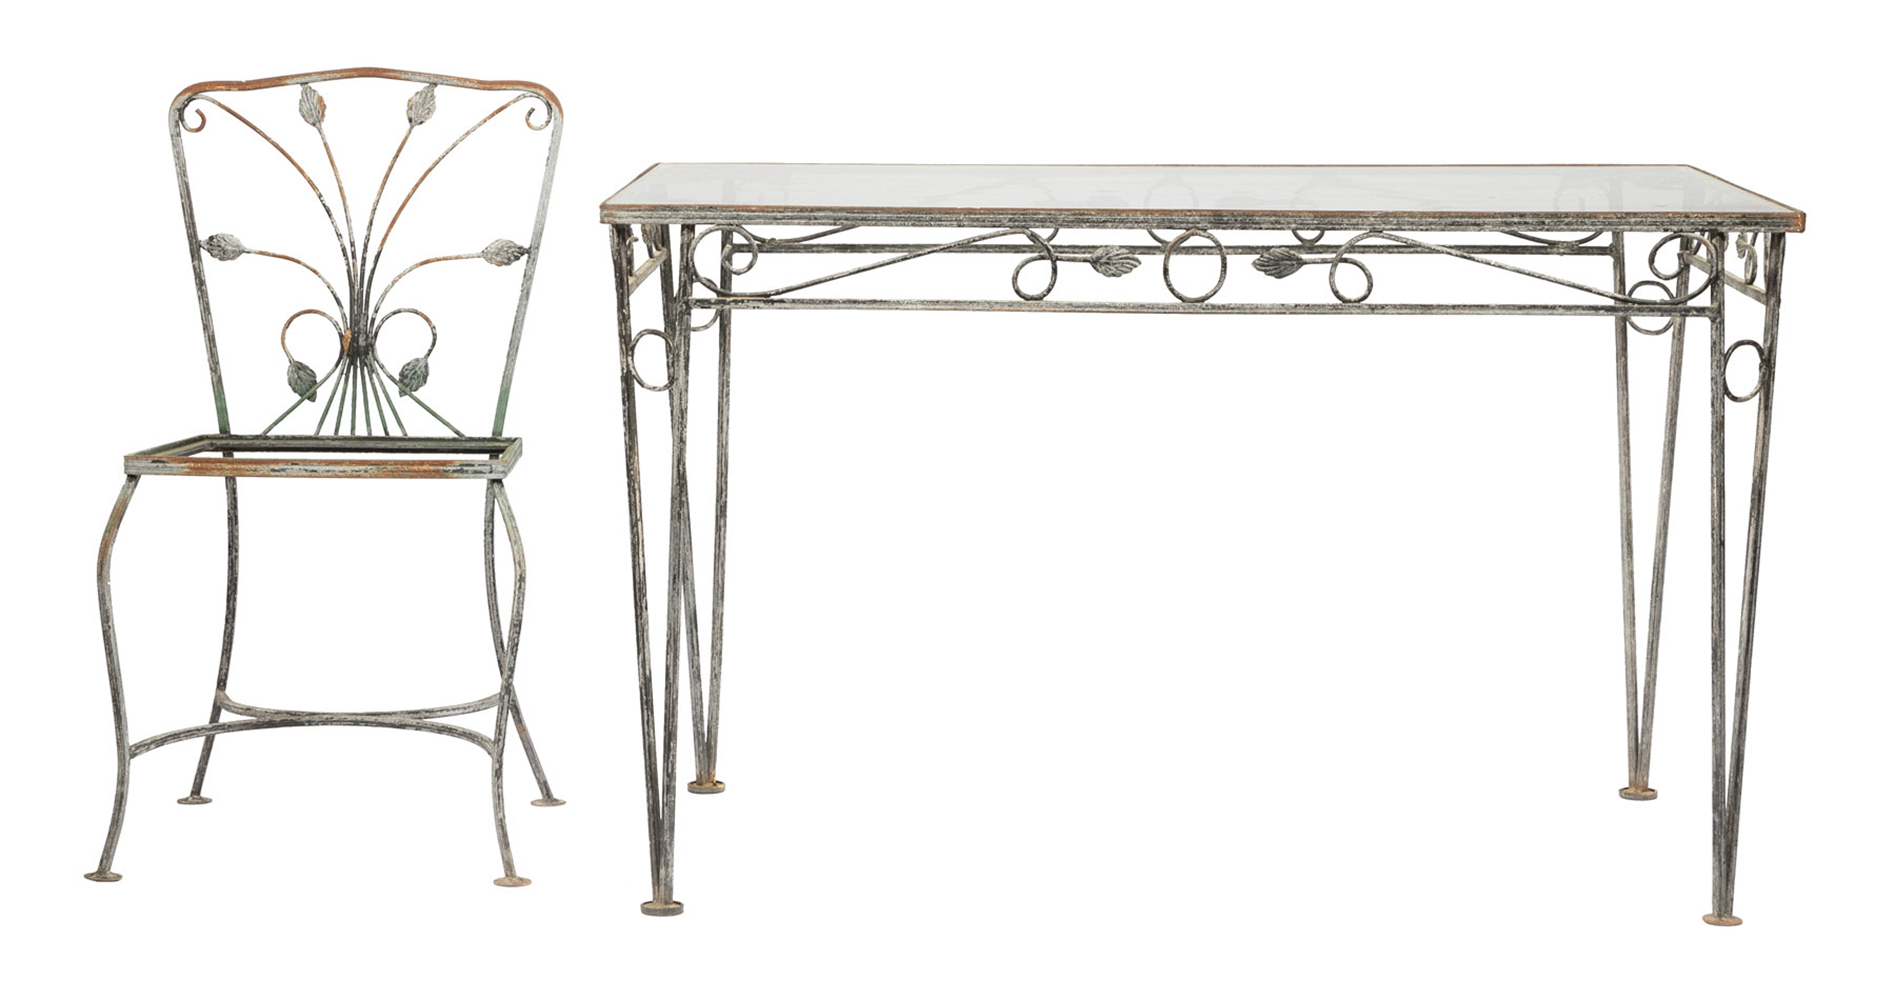 Vintage Wrought Iron Garden Suite, incl. four chairs and table with associated glass top, scroll and - Image 3 of 5